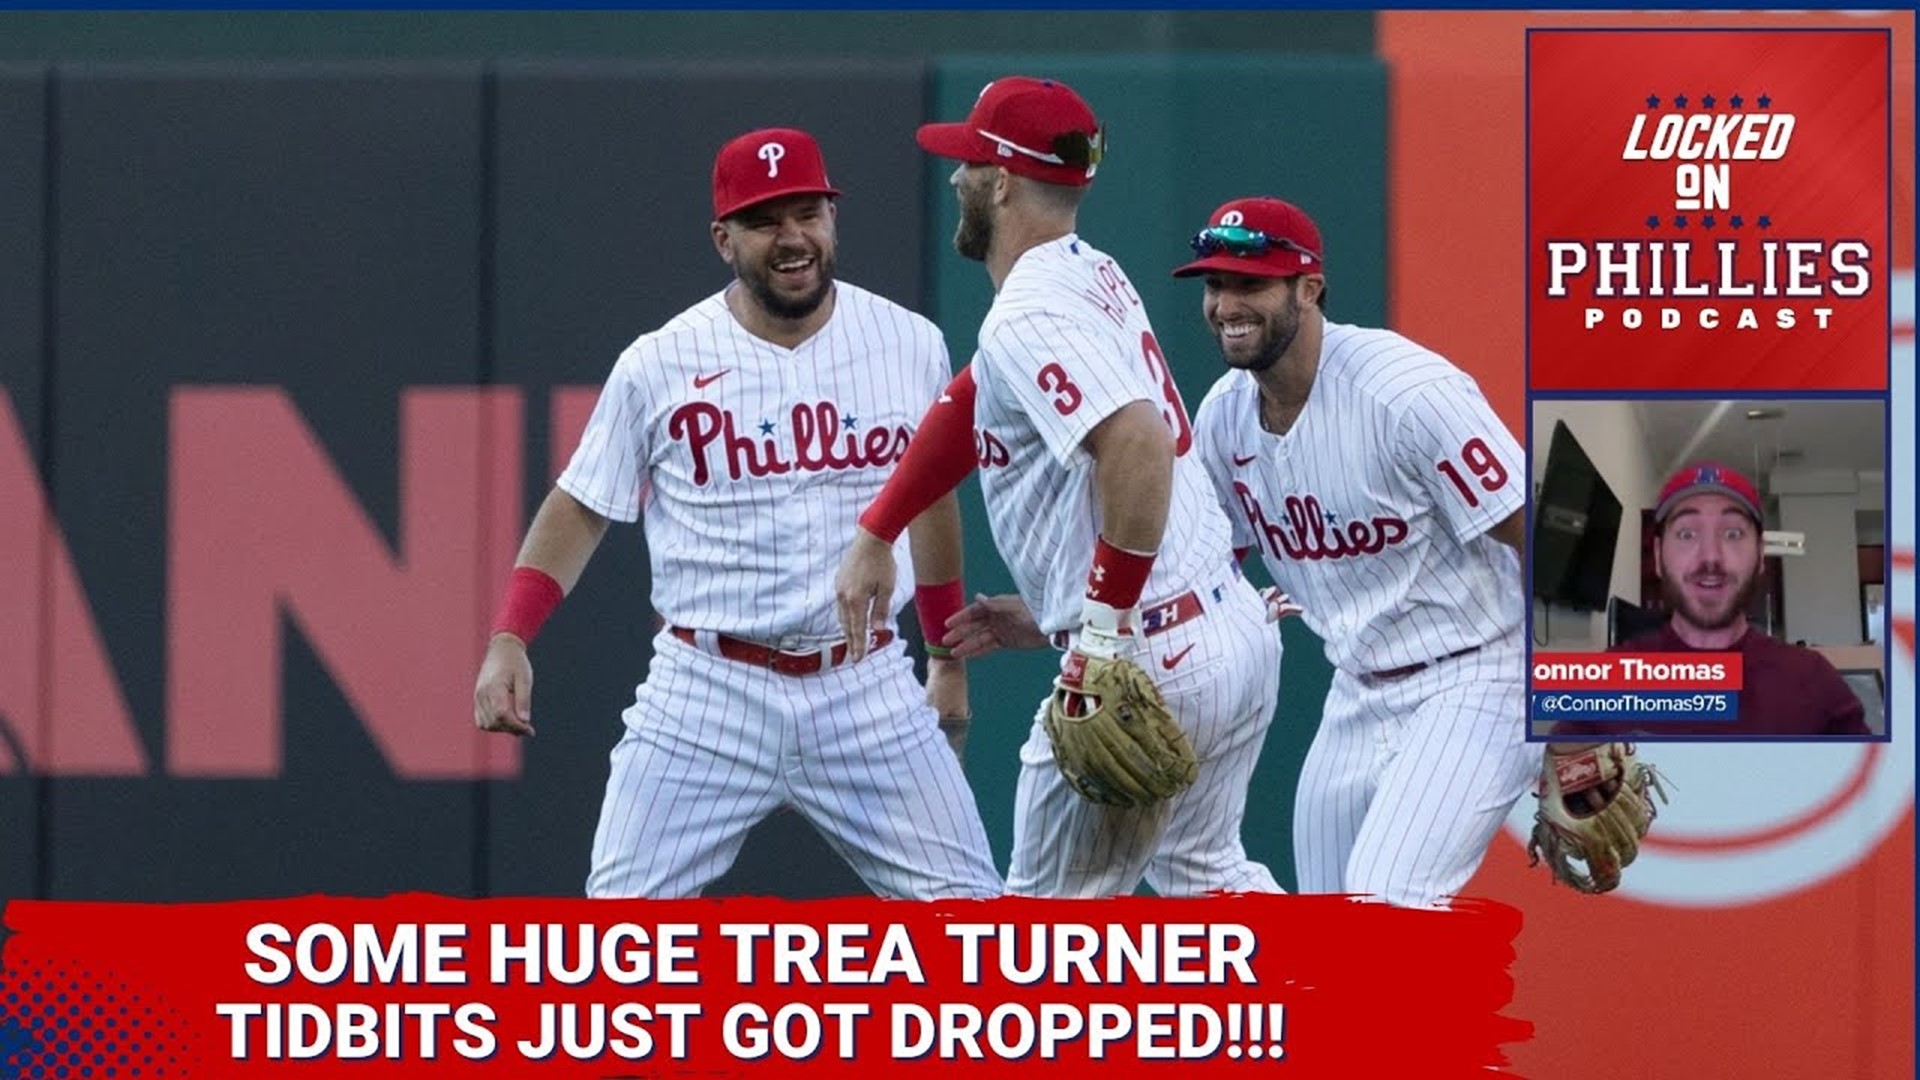 Connor reacts to reports from Jon Morosi and Buster Olney that broke this morning that the Philadelphia Phillies are considered the favorites to sign Trea Turner.